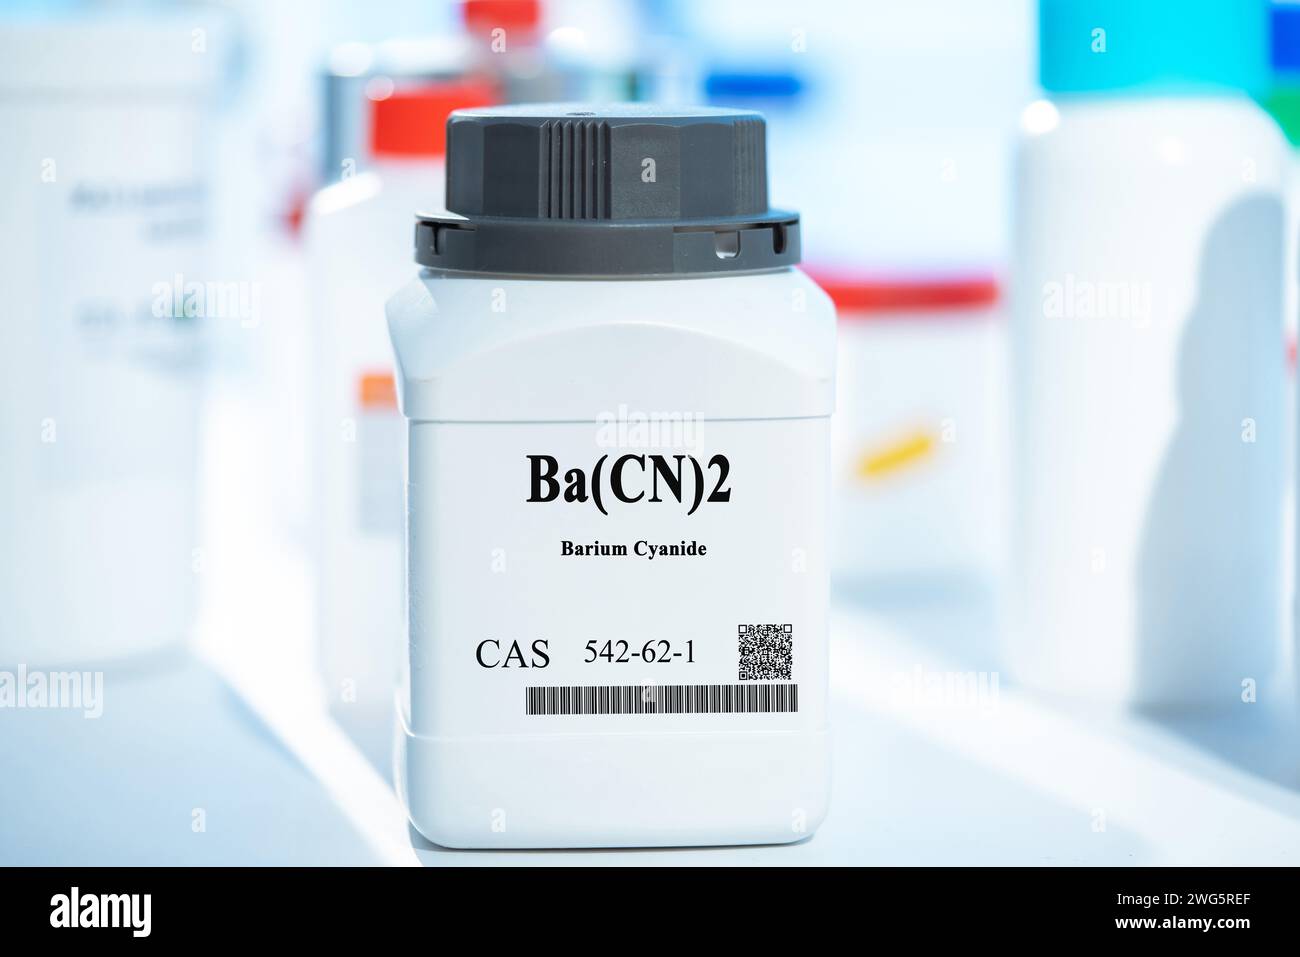 Ba(CN)2 barium cyanide CAS 542-62-1 chemical substance in white plastic laboratory packaging Stock Photo